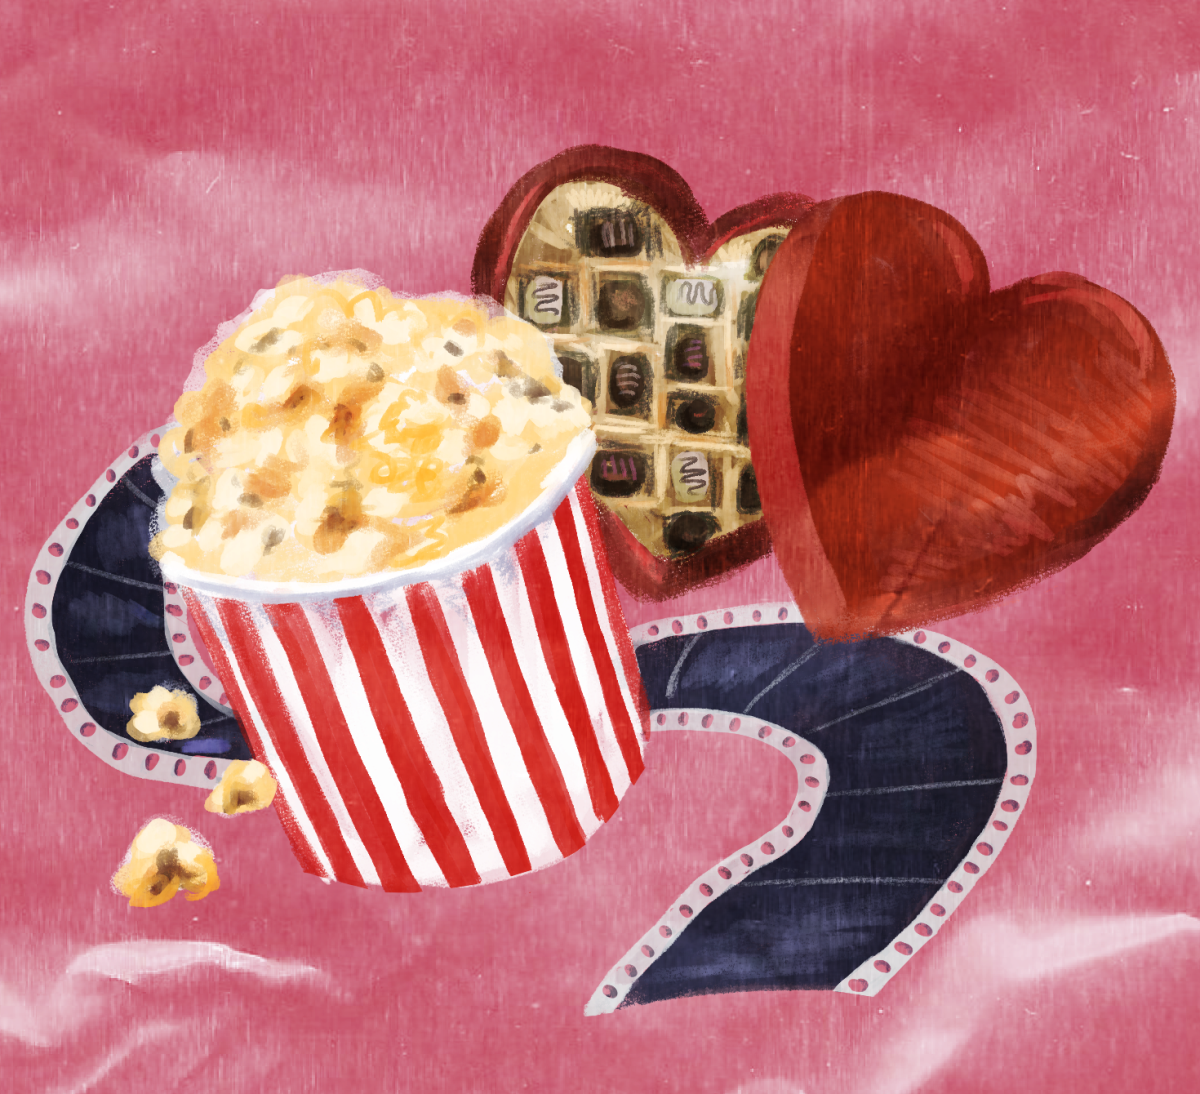 Films for everyone: what you should watch on Valentine’s based on who you celebrate with